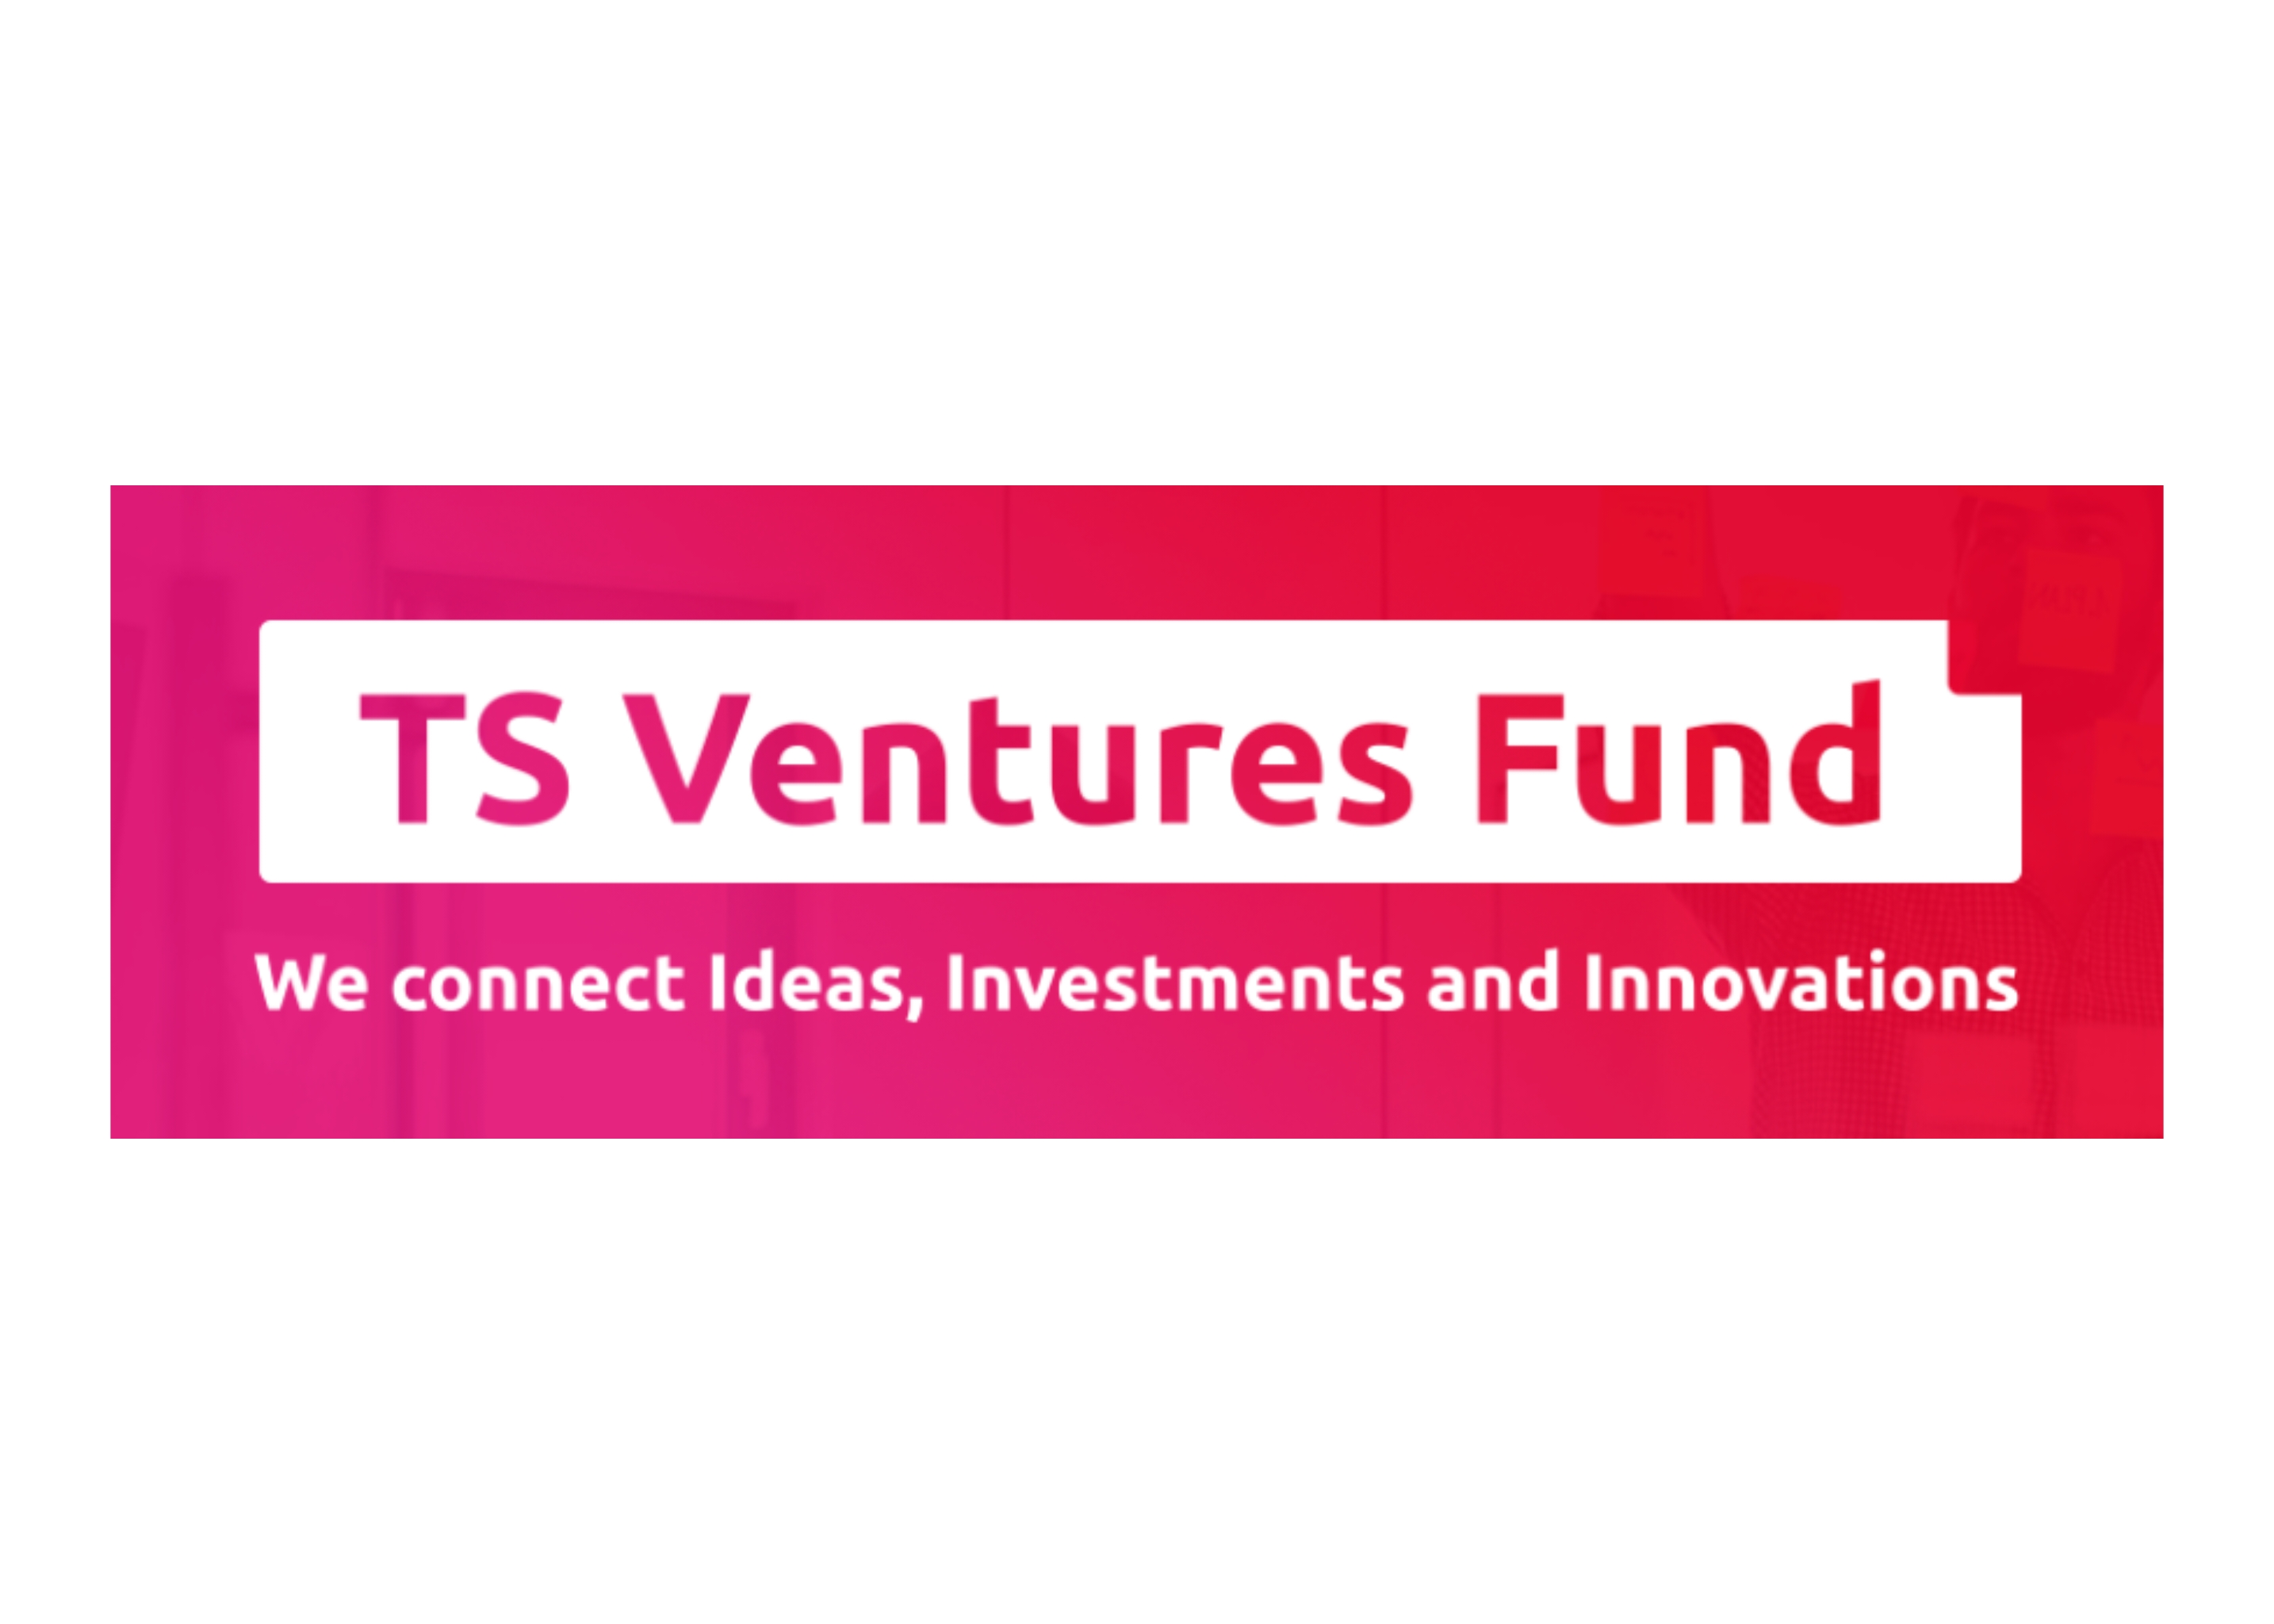 Welcome back TS Ventures Fund - our renewing Premium Plus member